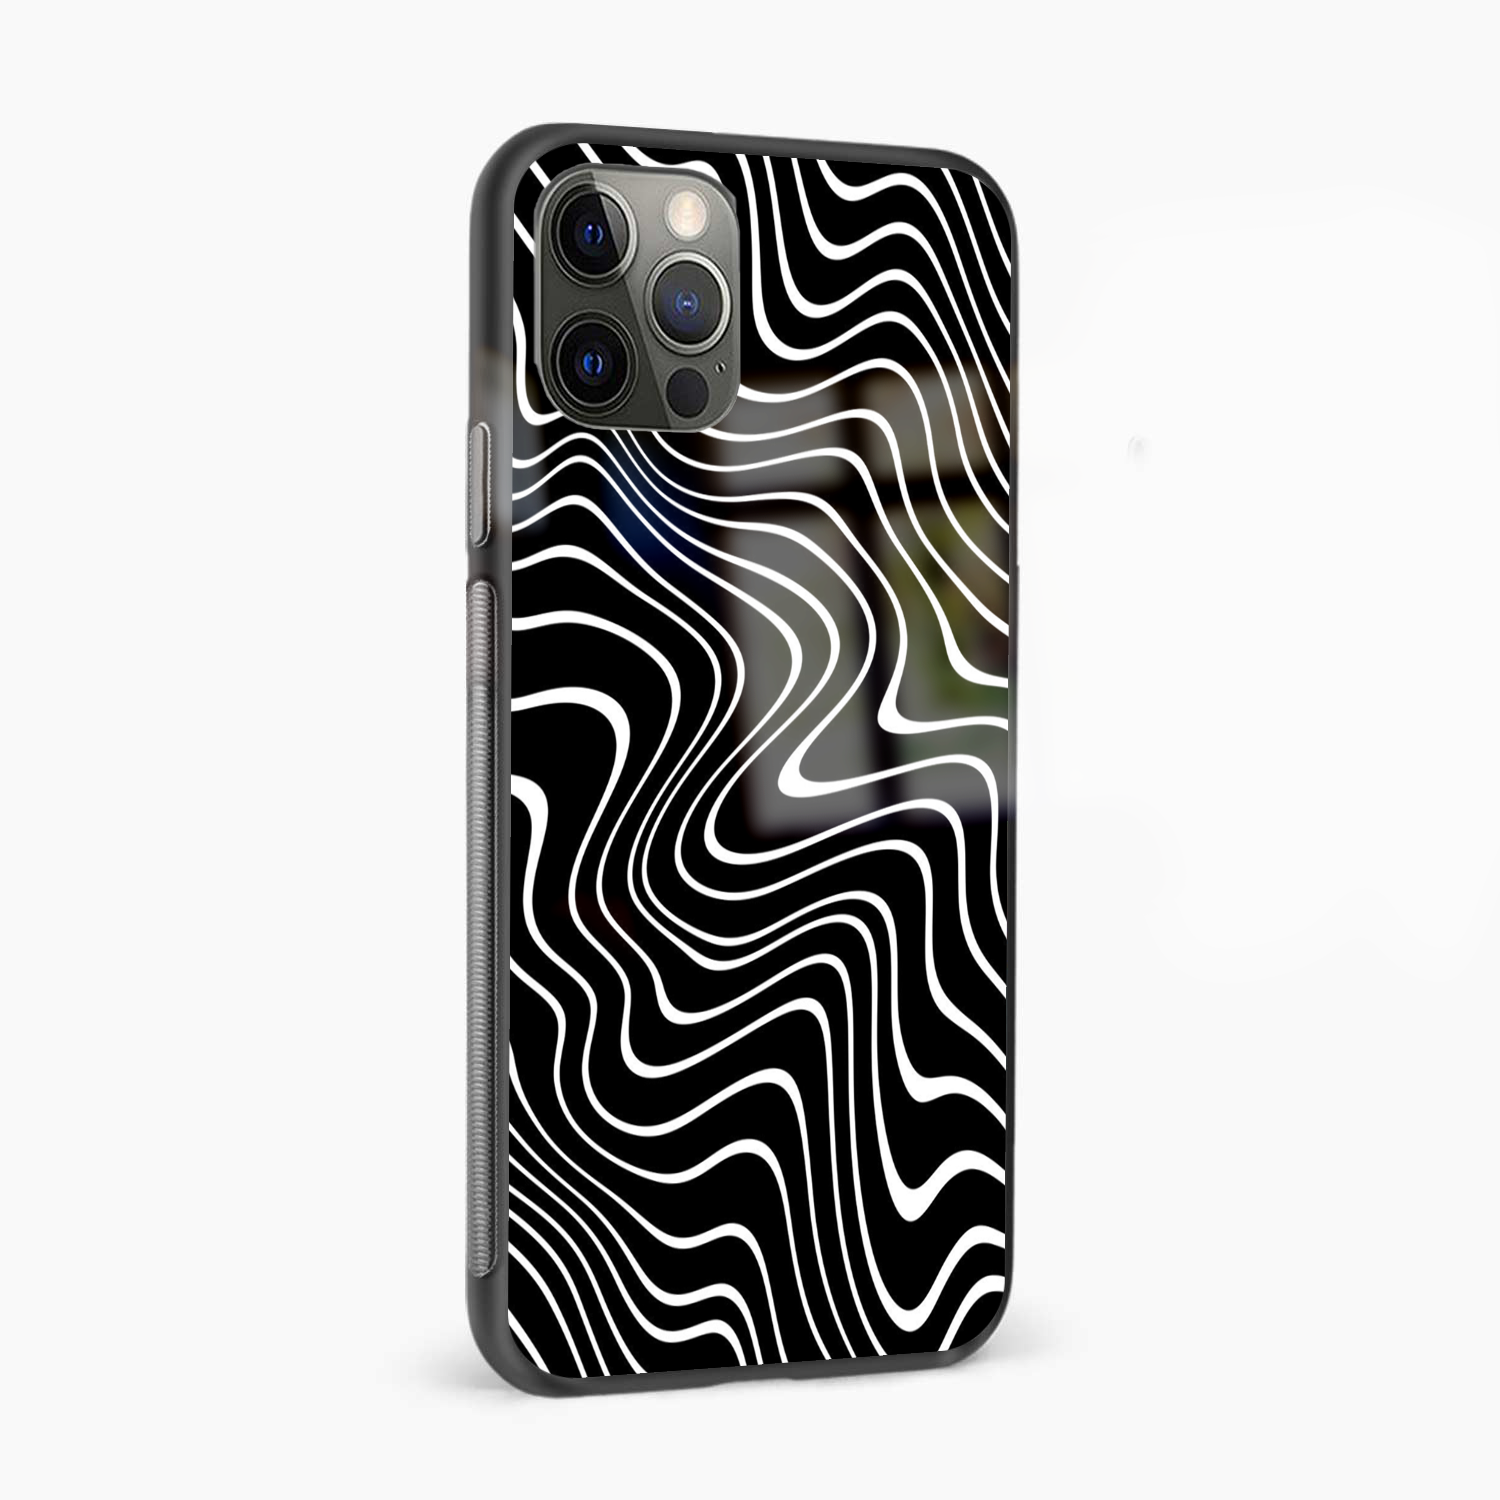 B&W Pattern Abstract Glass Phone Case Cover - Aesthetic Phone Covers - Culltique